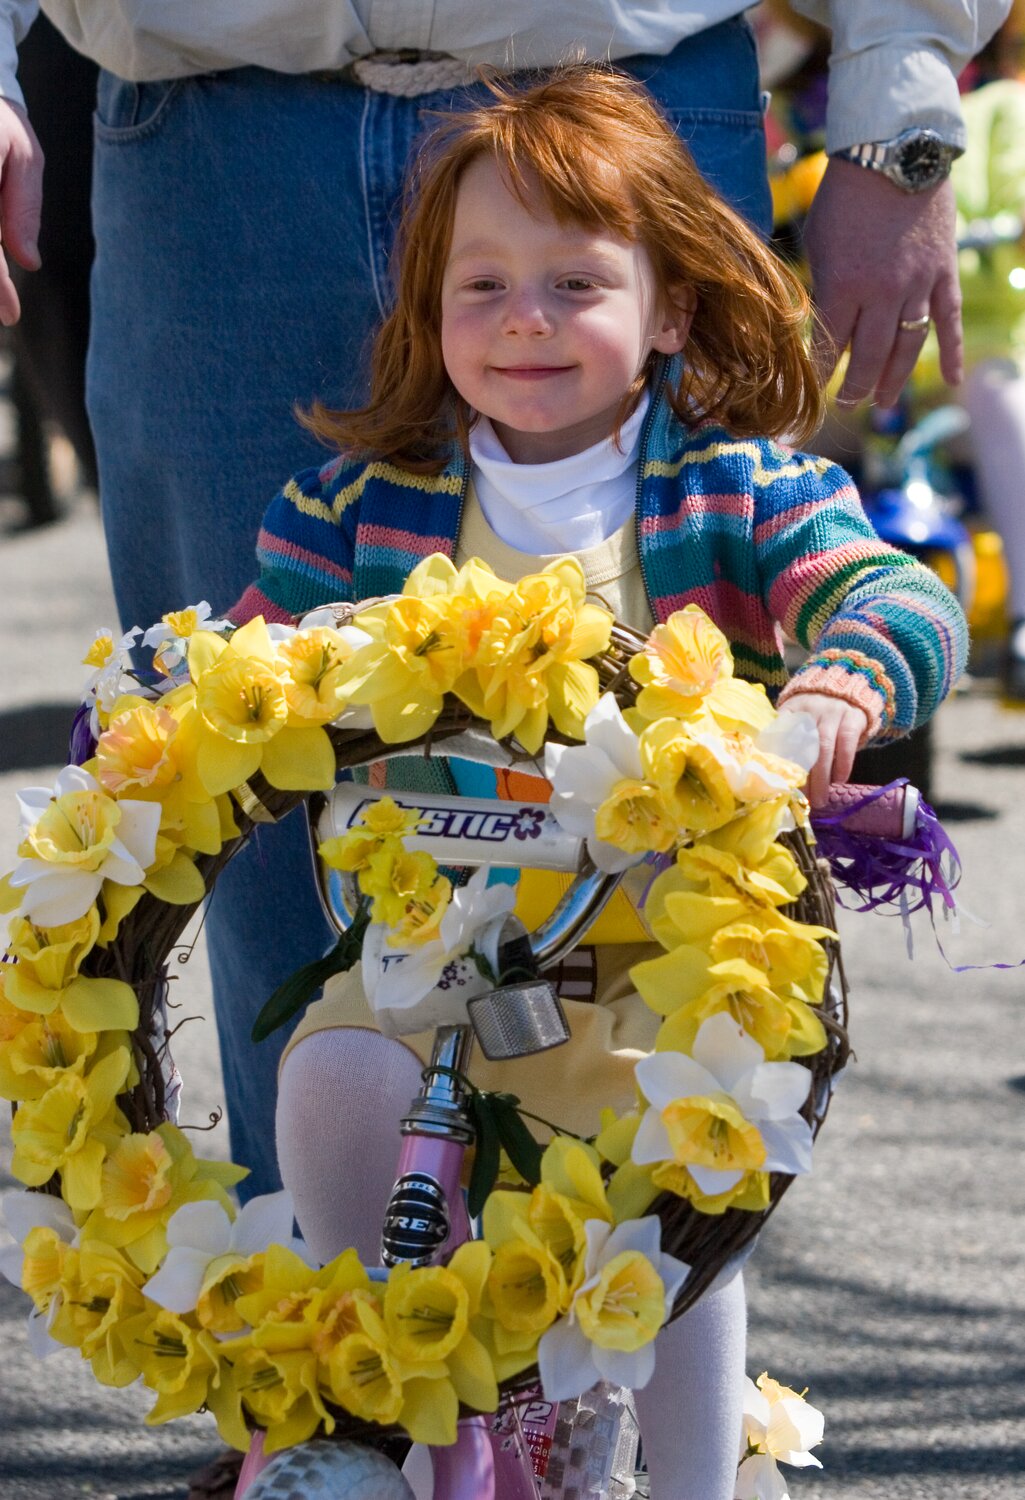 photo by Jim Powers.Scene from the Daffodil Festival events on Saturday, April 29, 2006.